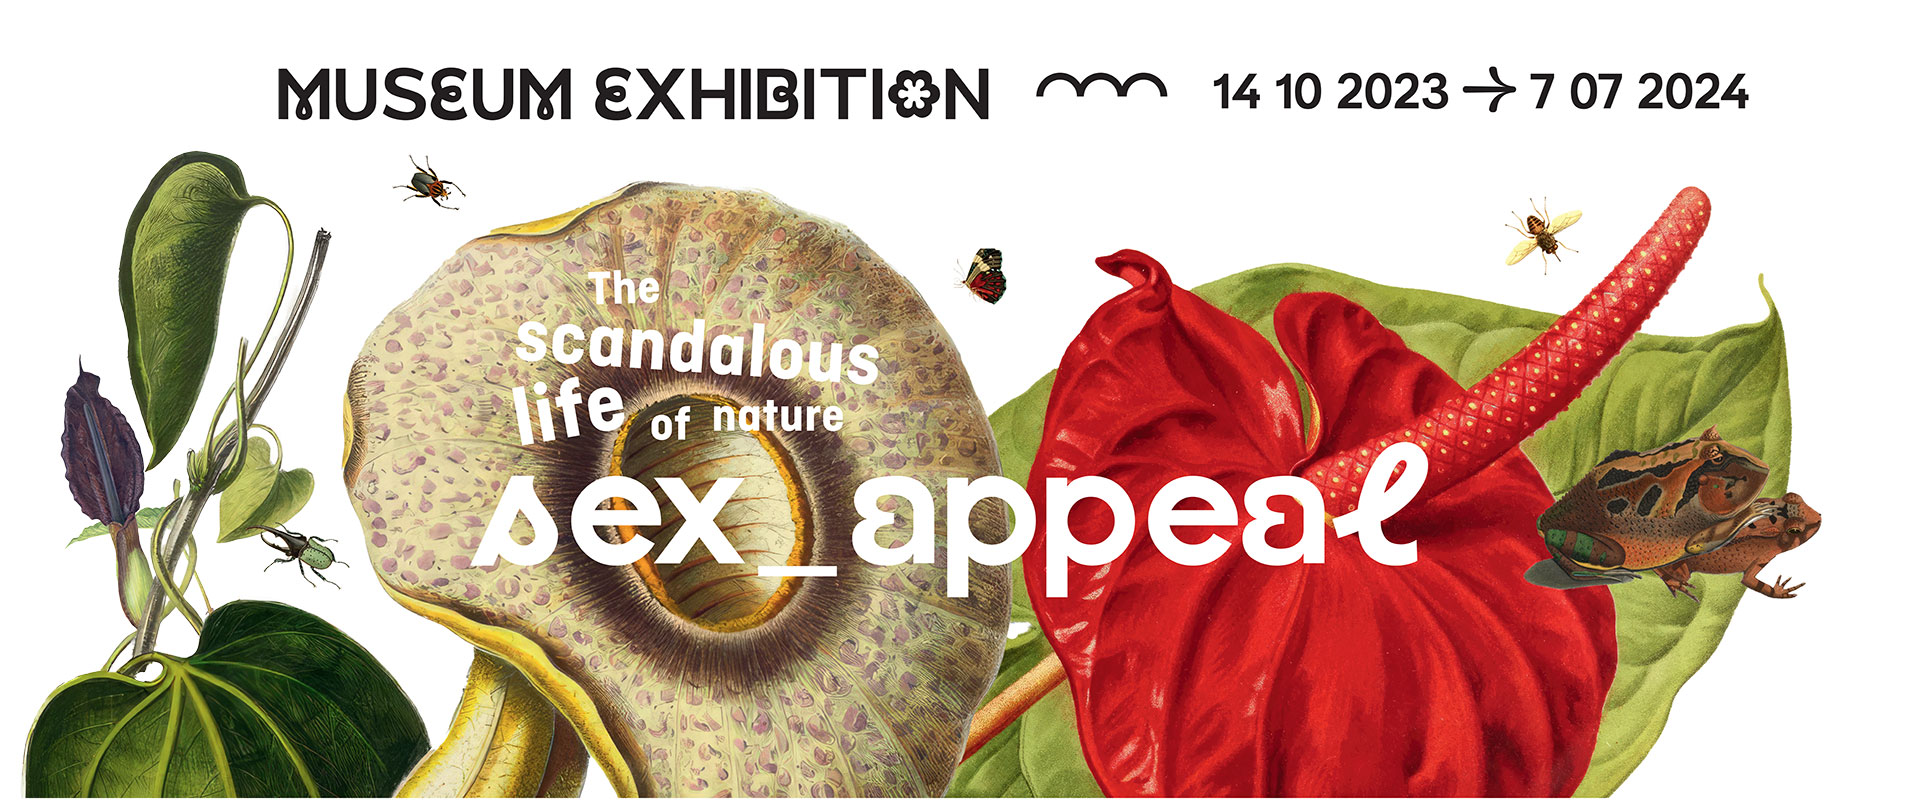 Sex-appeal exhibition